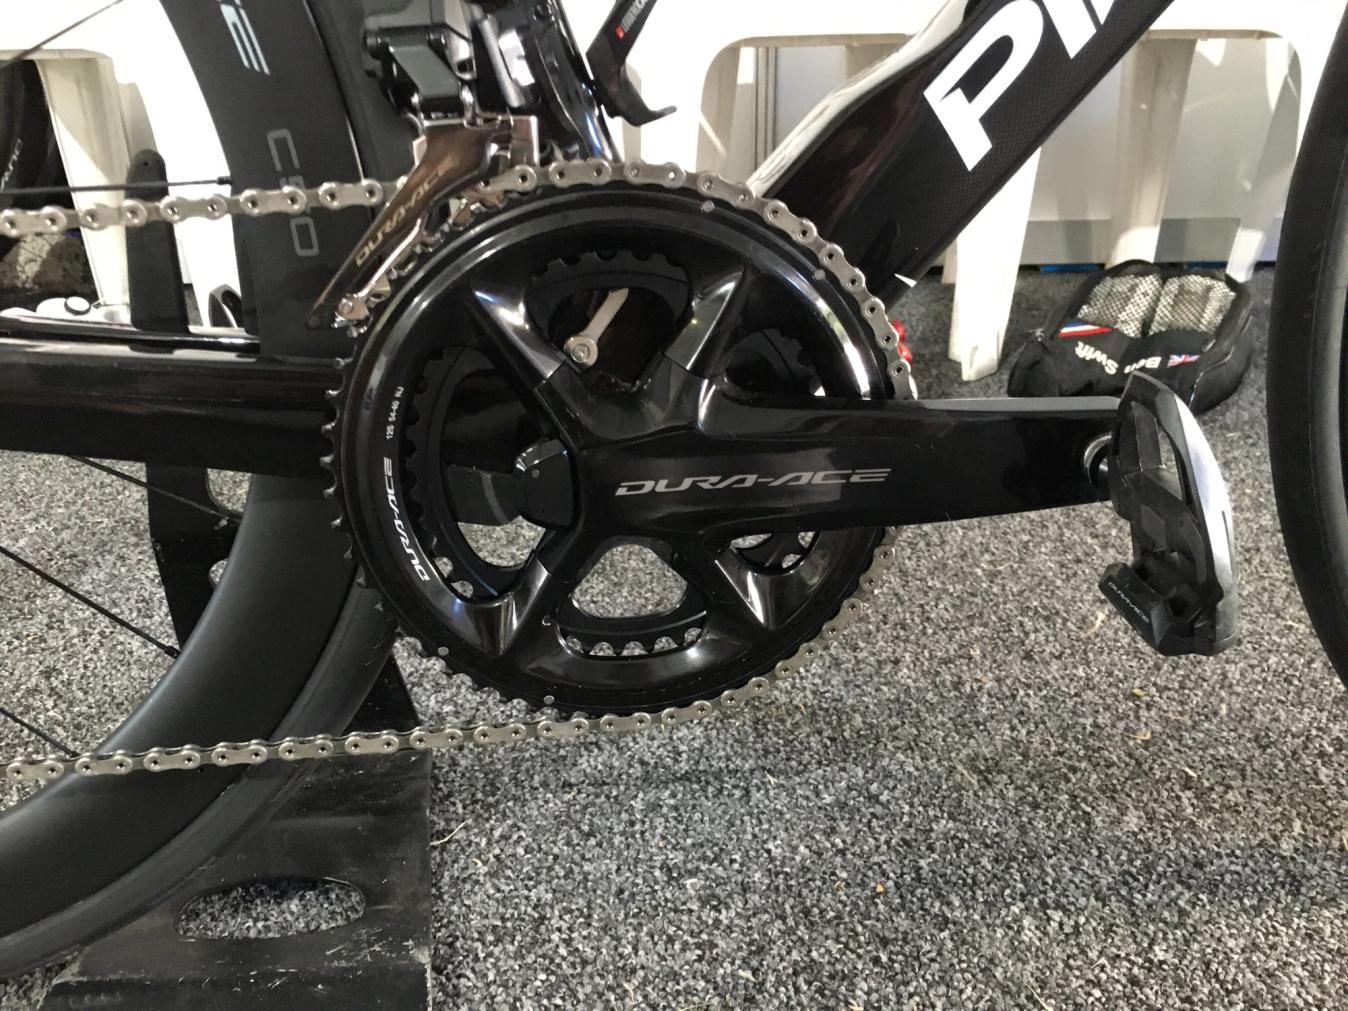 54/40t chainsets are popular in the WorldTour peloton